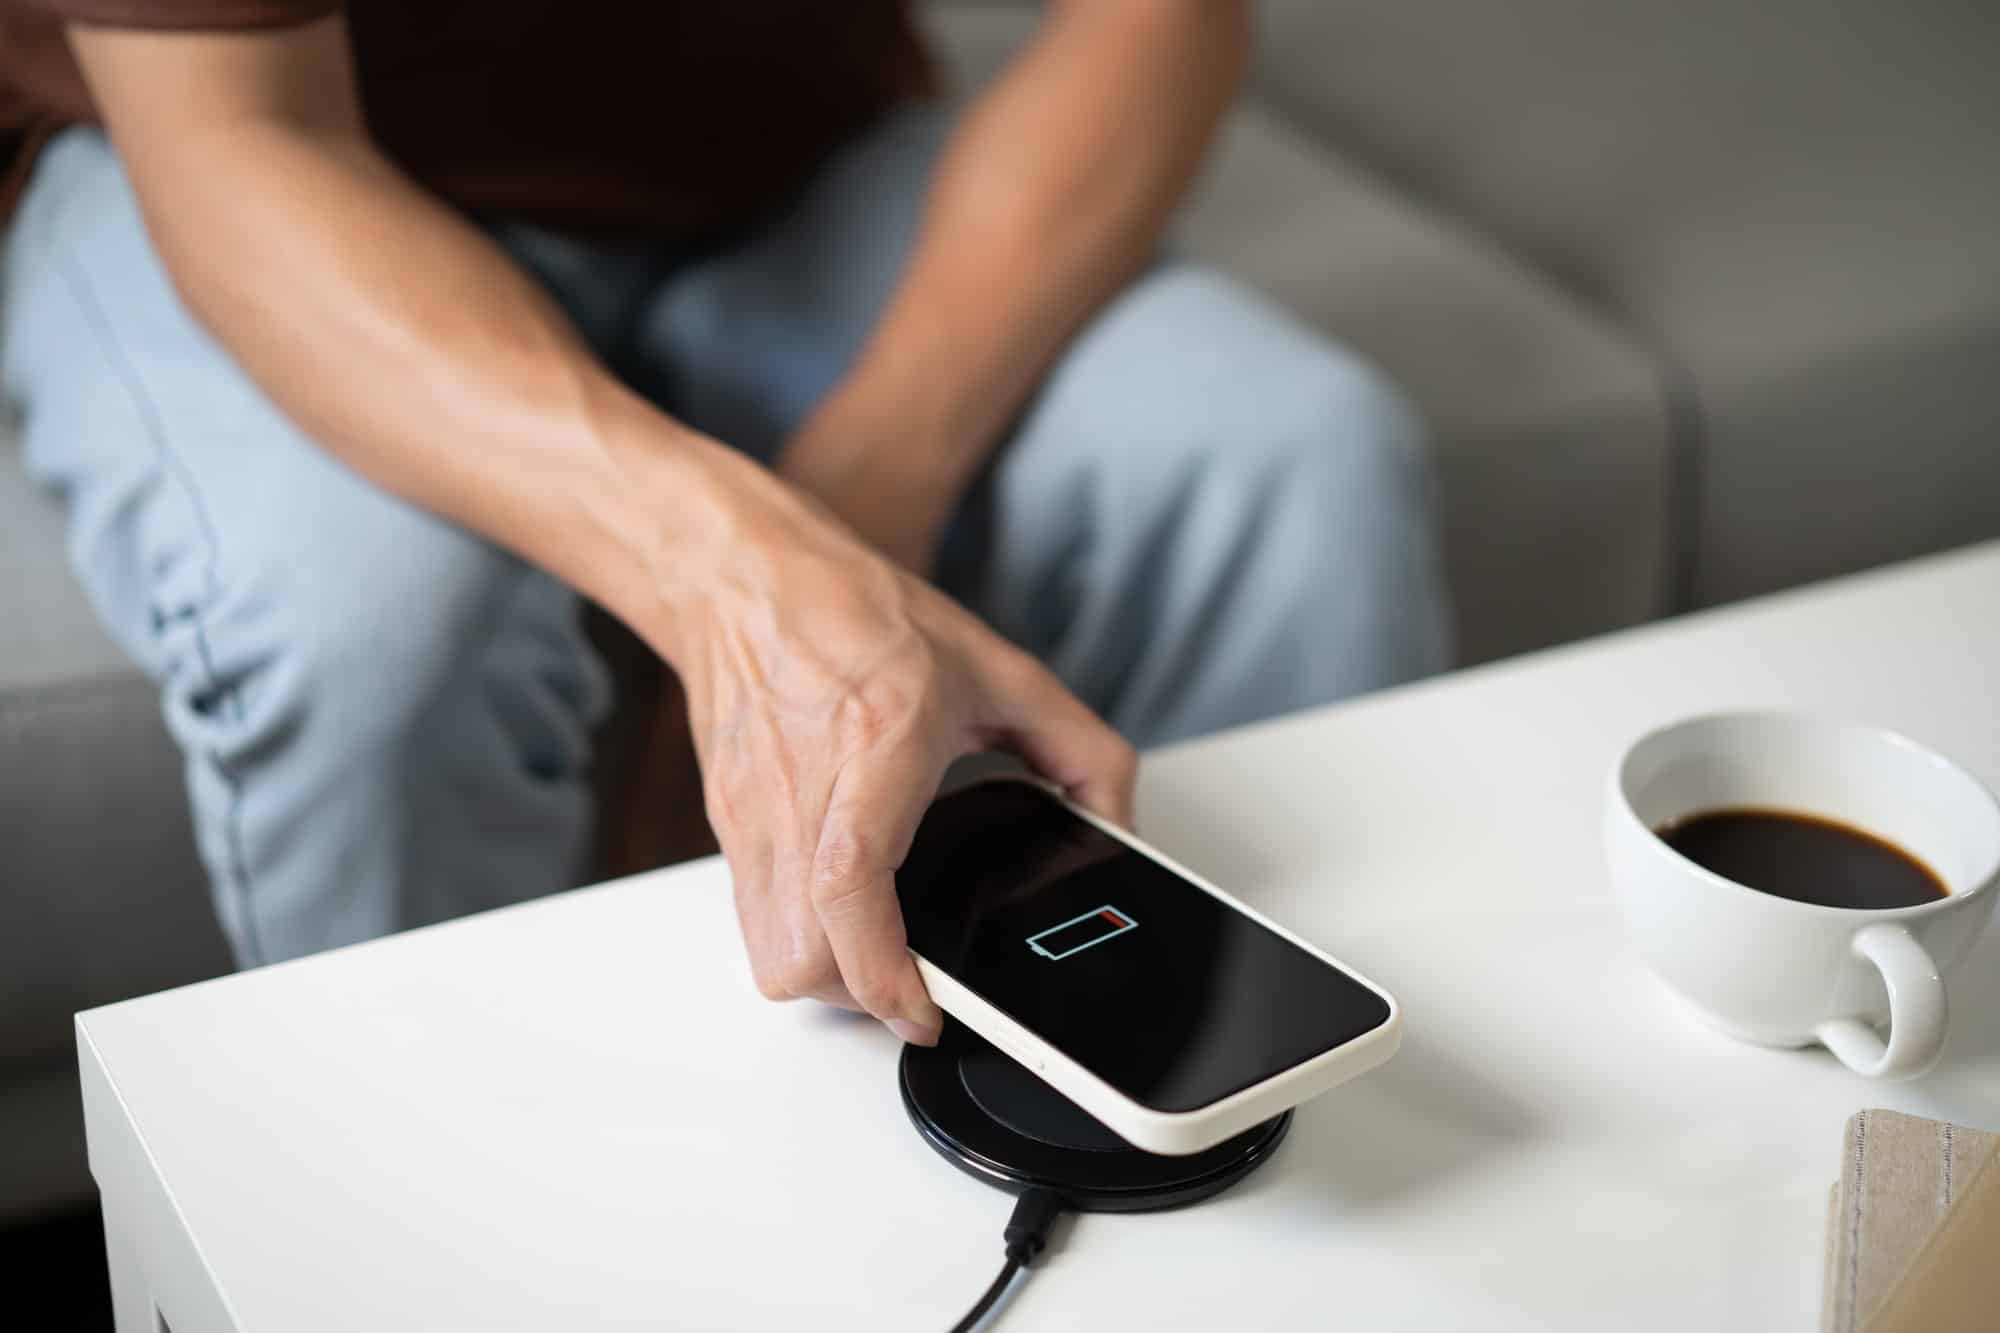 man hands charging mobile phone battery with low battery plugging a charger in a smart phone